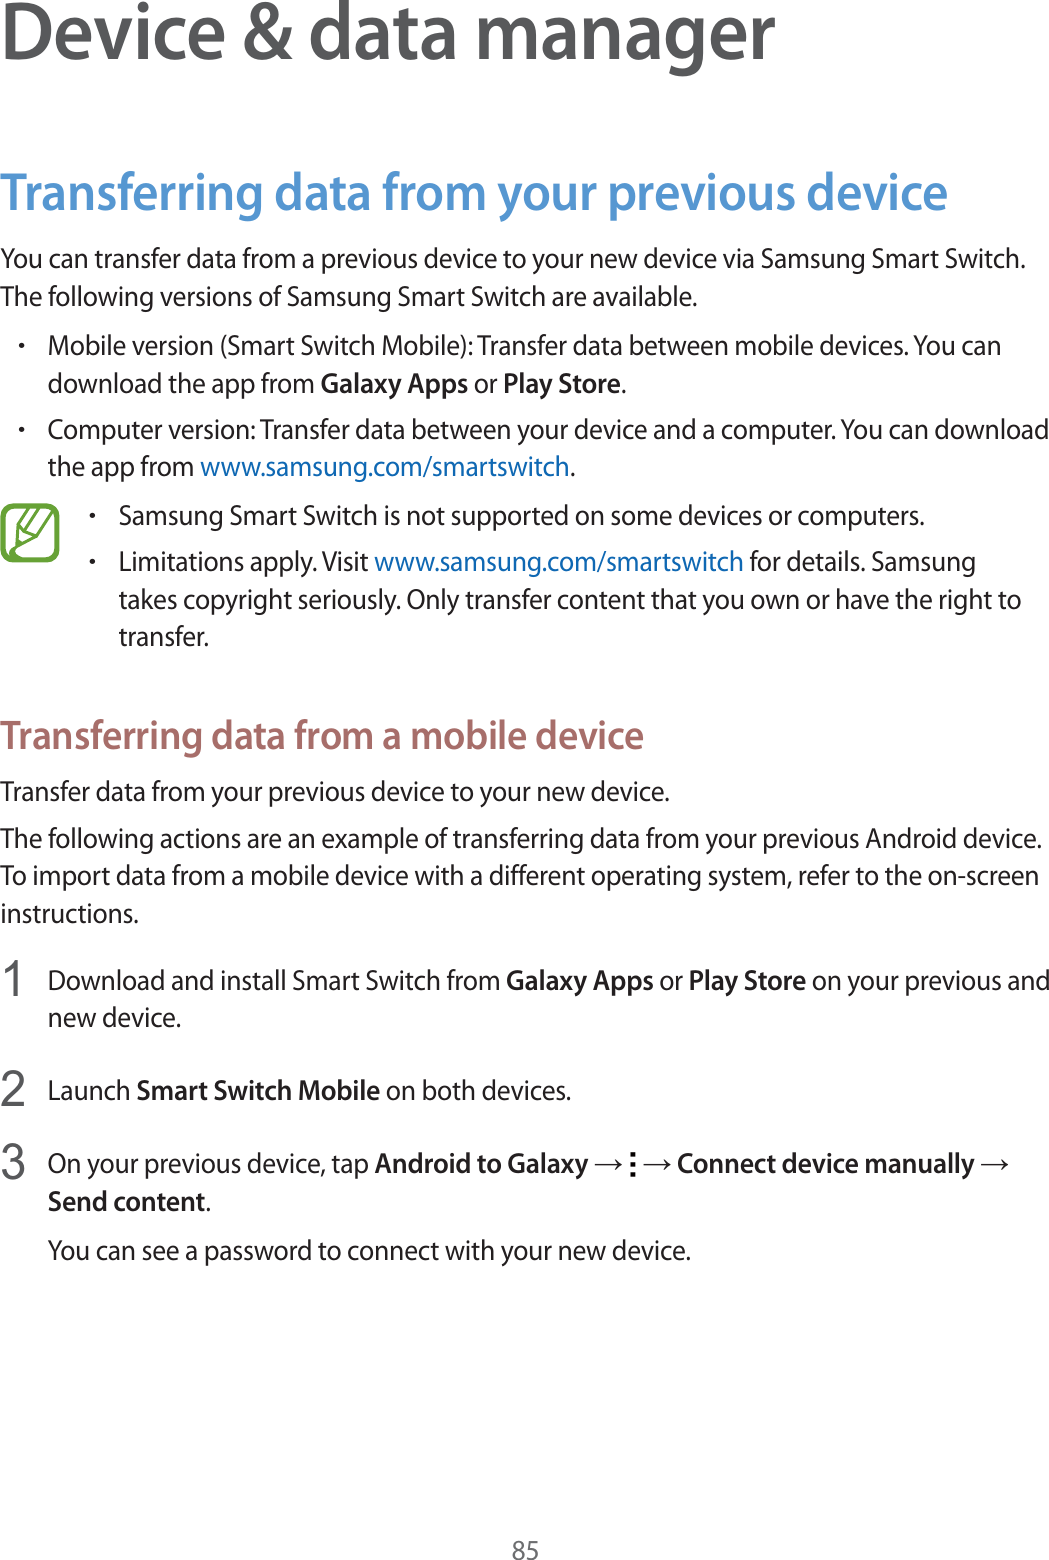 85Device &amp; data managerTransferring data from your previous deviceYou can transfer data from a previous device to your new device via Samsung Smart Switch. The following versions of Samsung Smart Switch are available.rMobile version (Smart Switch Mobile): Transfer data between mobile devices. You can download the app from Galaxy Apps or Play Store.rComputer version: Transfer data between your device and a computer. You can download the app from www.samsung.com/smartswitch.rSamsung Smart Switch is not supported on some devices or computers.rLimitations apply. Visit www.samsung.com/smartswitch for details. Samsung takes copyright seriously. Only transfer content that you own or have the right to transfer.Transferring data from a mobile deviceTransfer data from your previous device to your new device.The following actions are an example of transferring data from your previous Android device. To import data from a mobile device with a different operating system, refer to the on-screen instructions.1Download and install Smart Switch from Galaxy Apps or Play Store on your previous and new device.2Launch Smart Switch Mobile on both devices.3On your previous device, tap Android to Galaxy ĺ   ĺ Connect device manually ĺ Send content.You can see a password to connect with your new device.